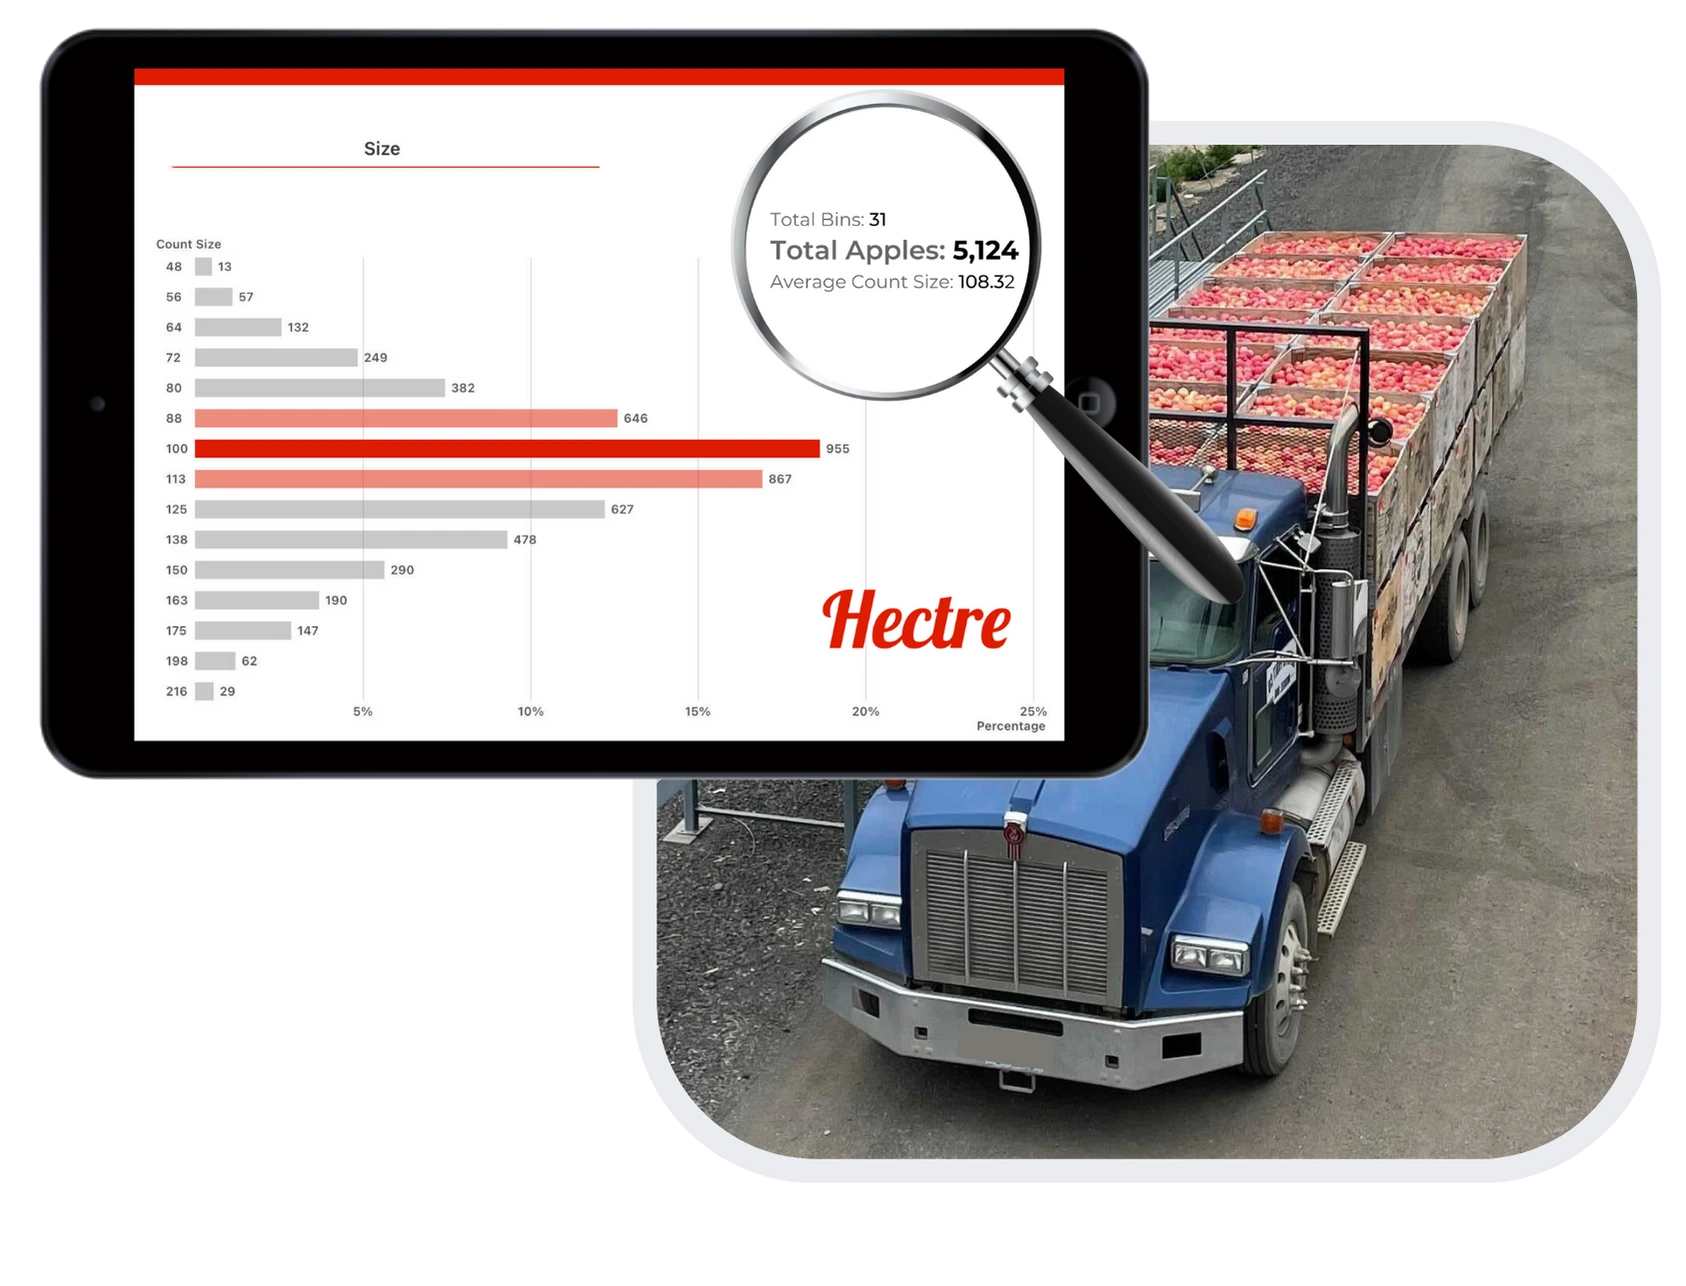 Hectre's sizing graph and apple truck